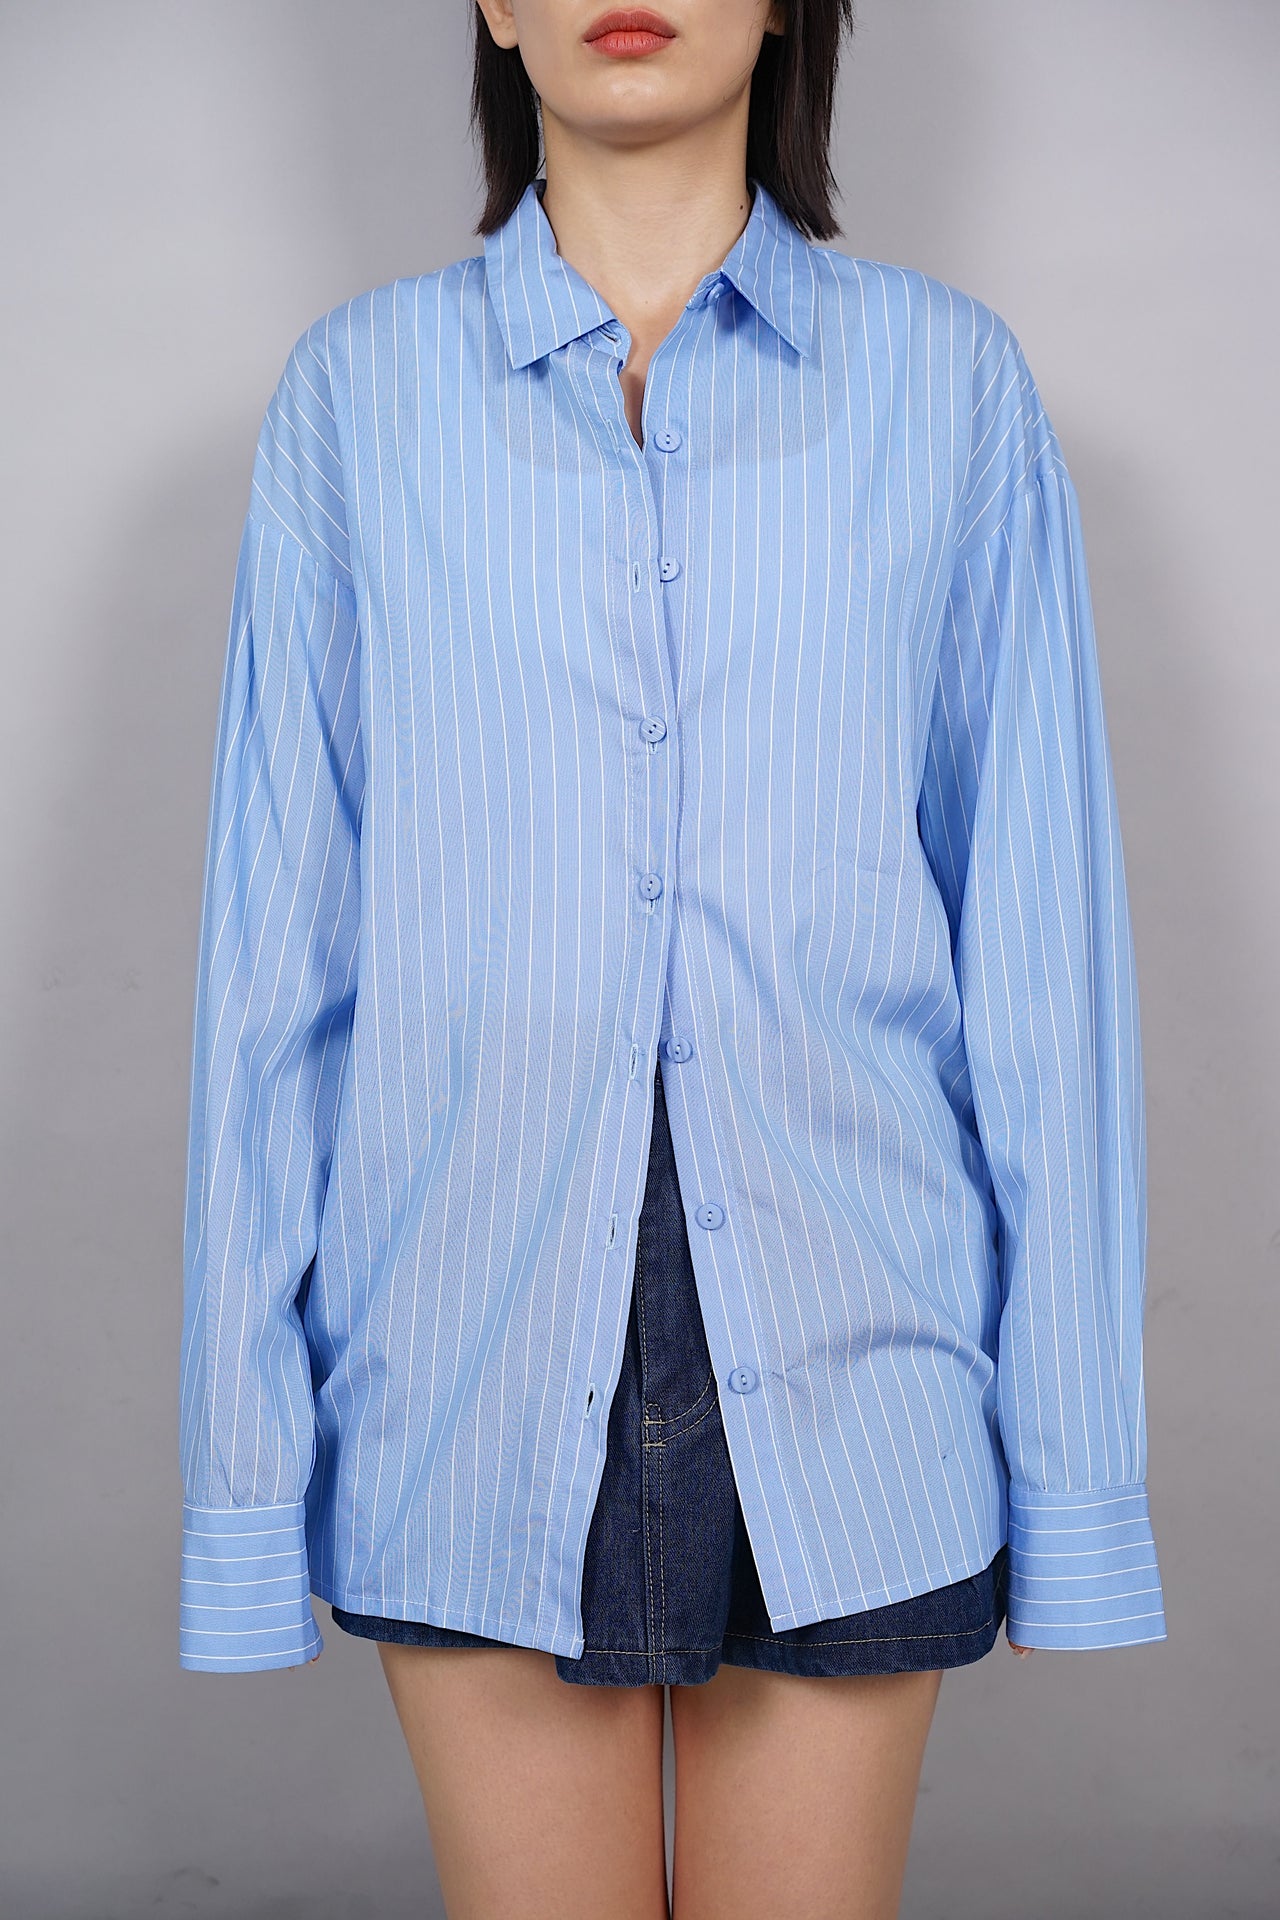 Collared Button-Down Shirt in Blue Pinstripes - Arriving Soon